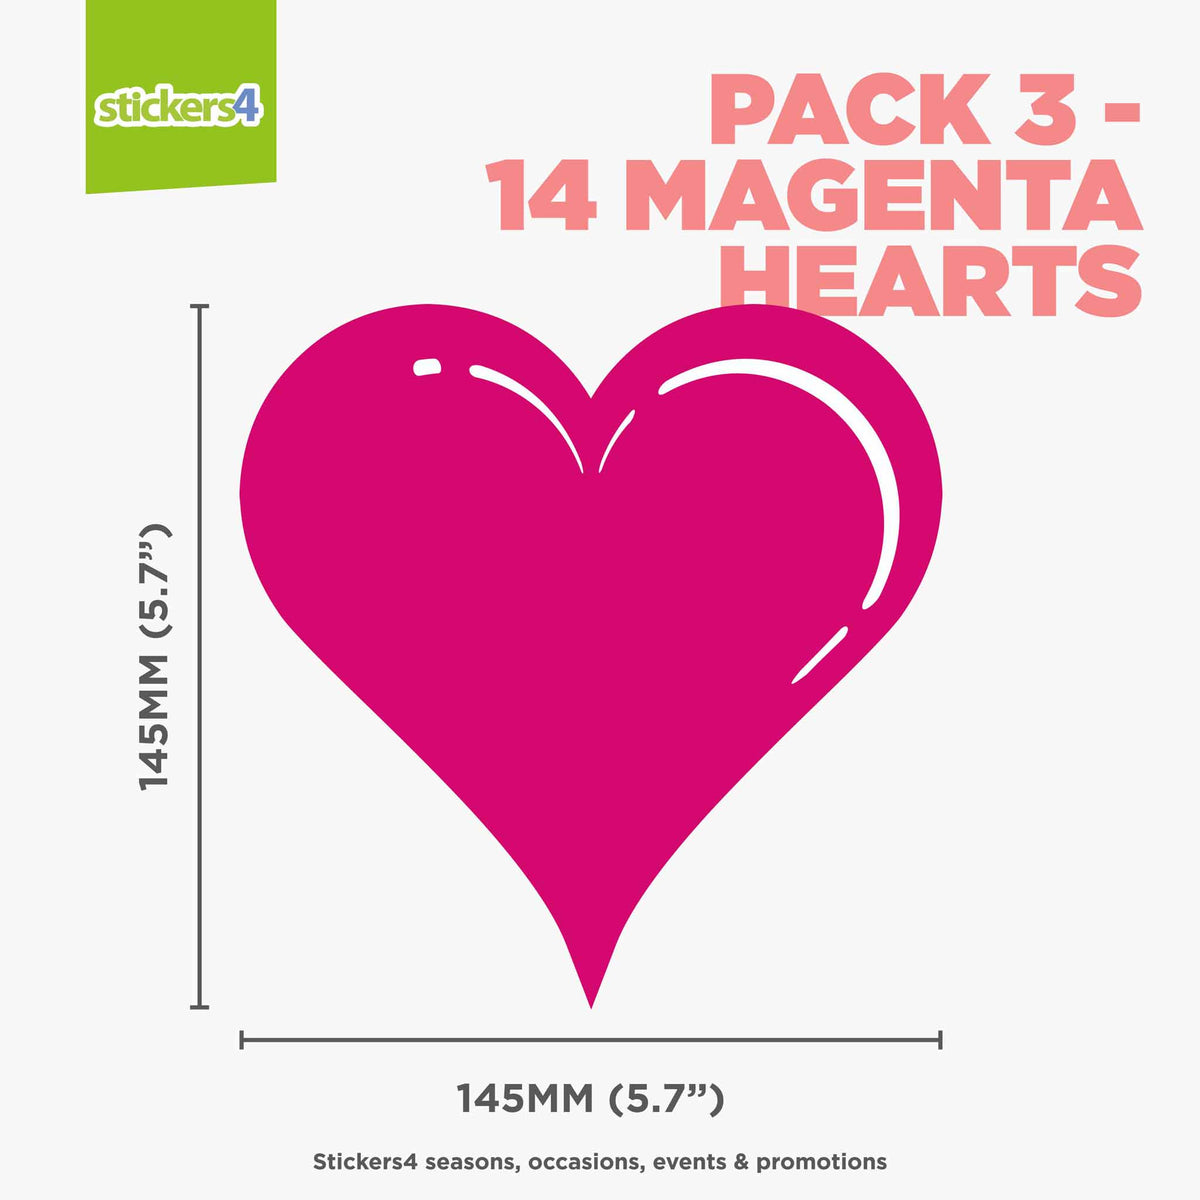 Static Cling Hearts: Pack 3 (14 Hearts @ 145mm)